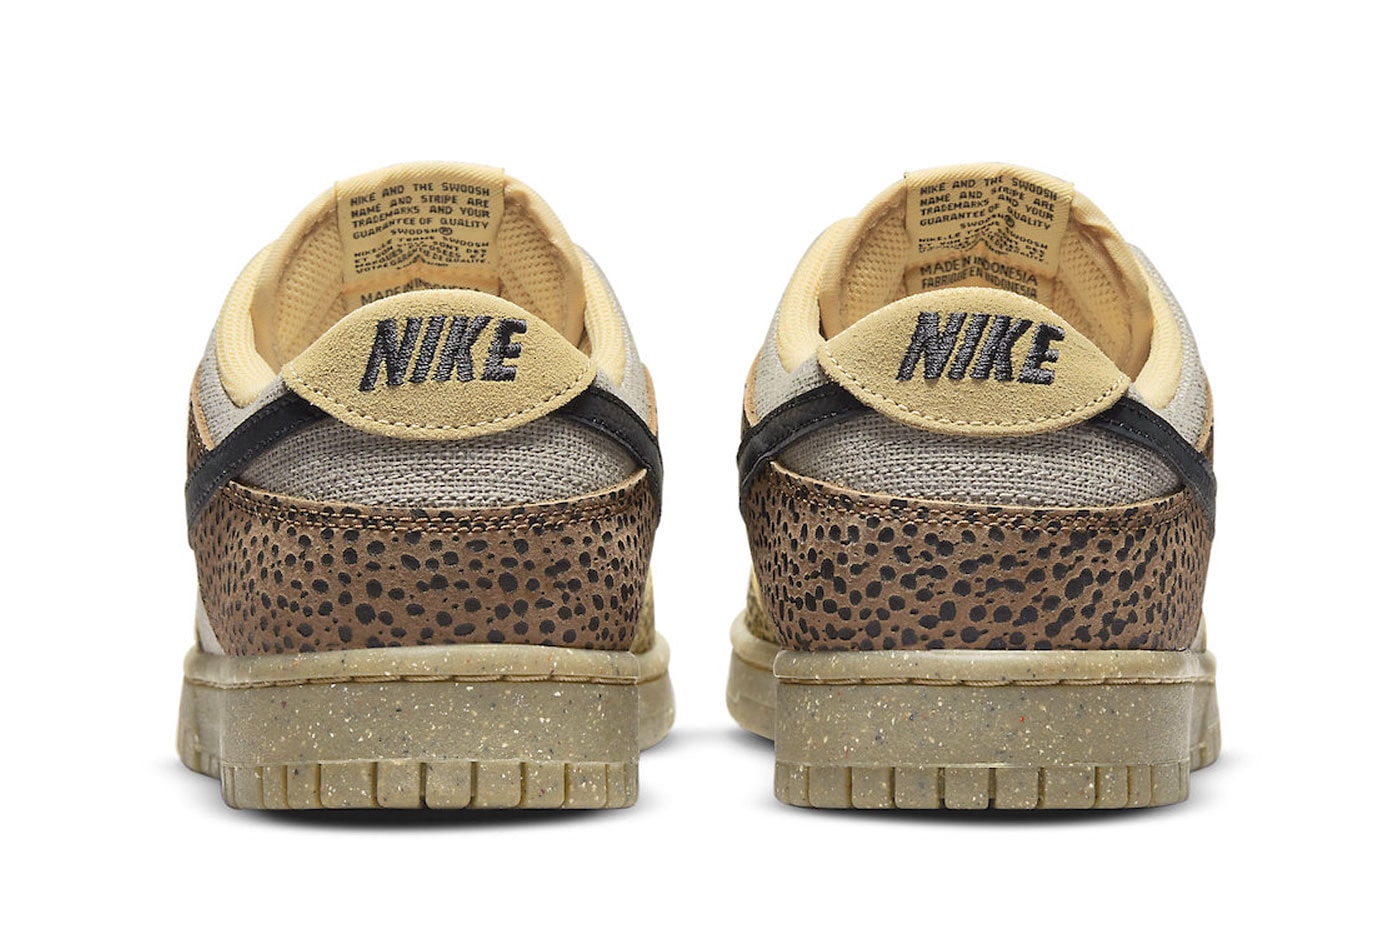 Nike Dunk Low Safari dx2654 200 cheetah print canvas leather green yellow brown black grind sole release info date price official images